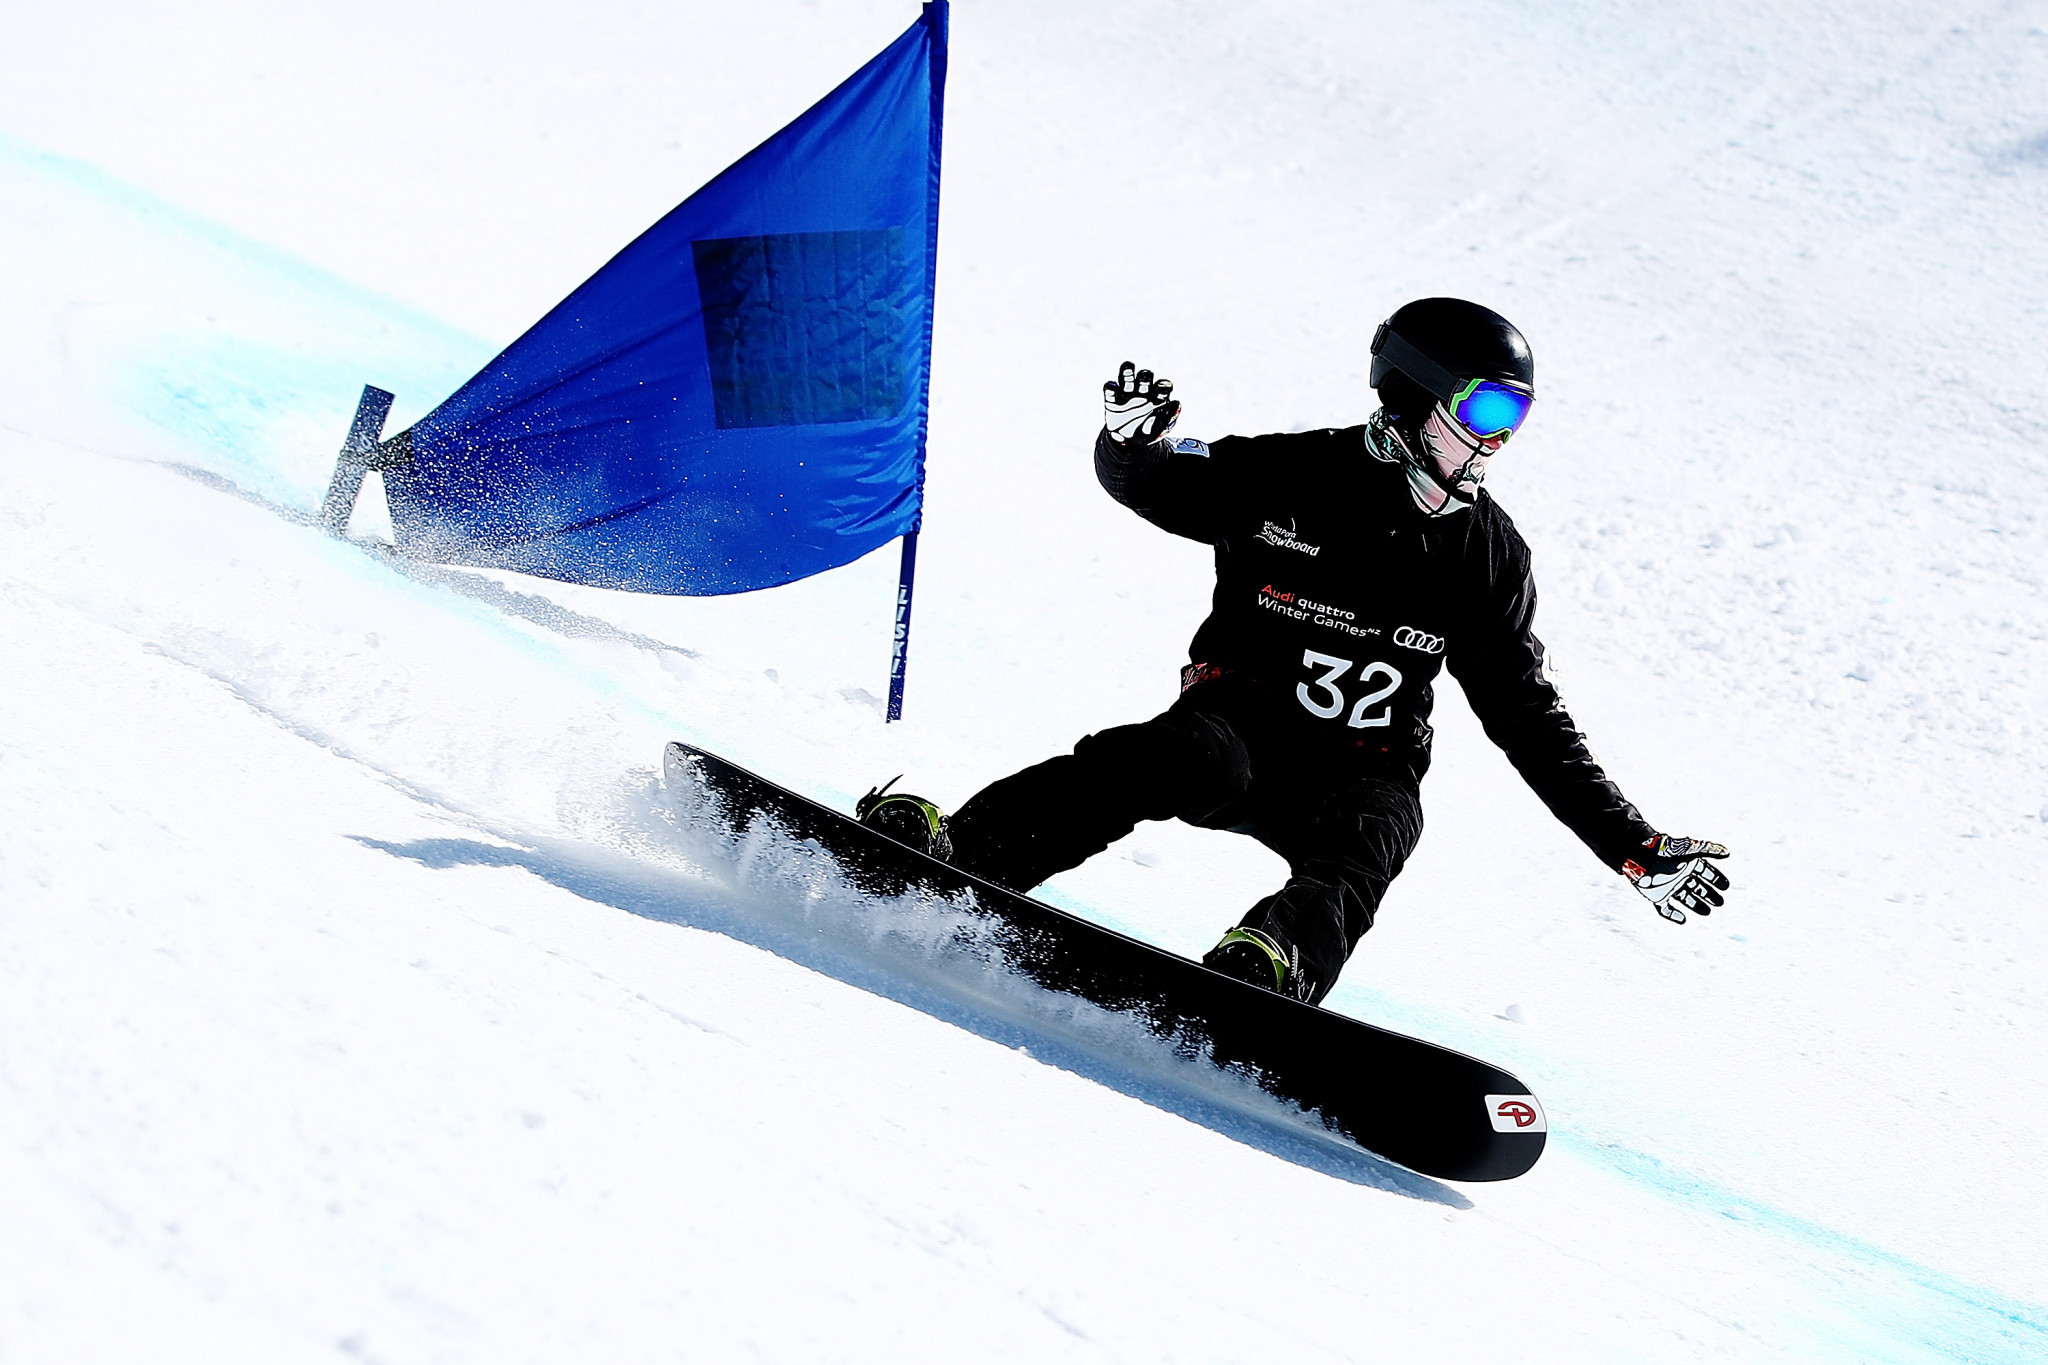 Snowboarder Tudhope named IPC Allianz Athlete of the Month for December